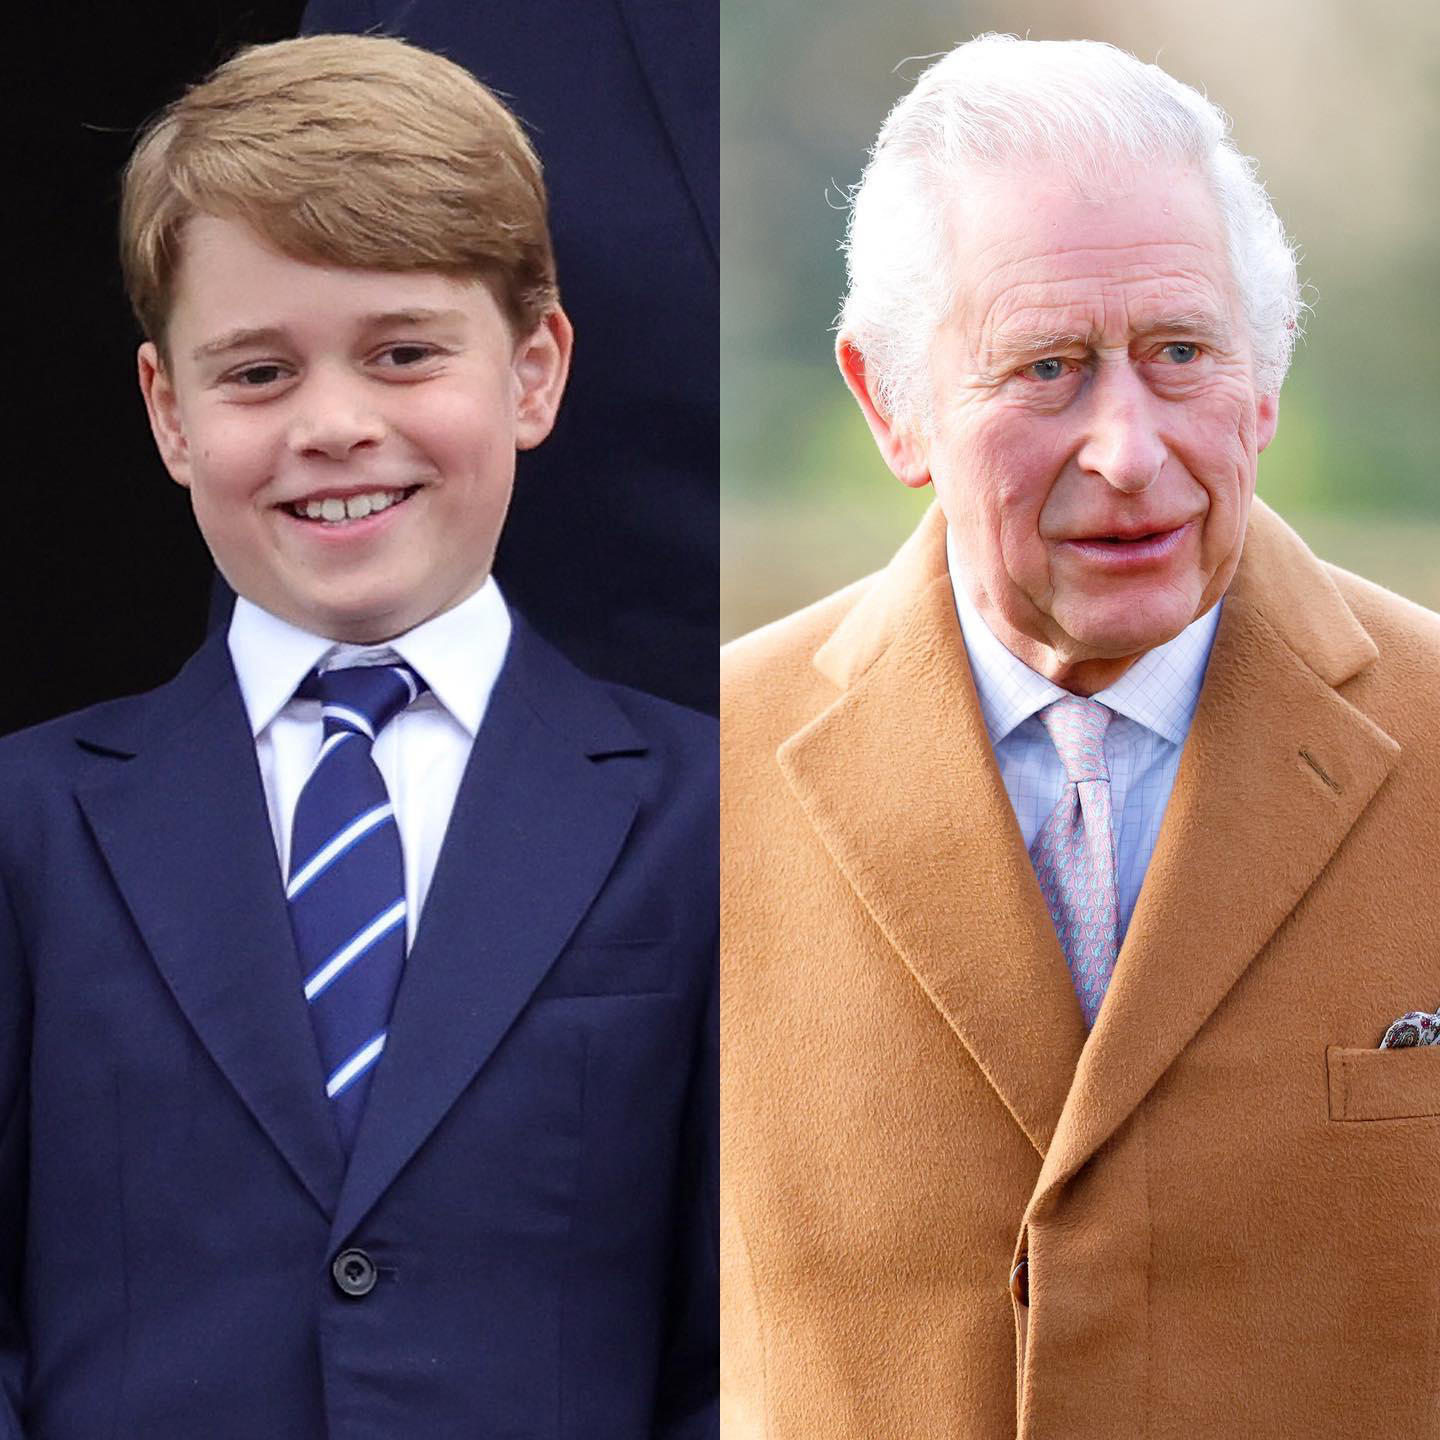 Prince George will have a special role in his grandfather’s coronation